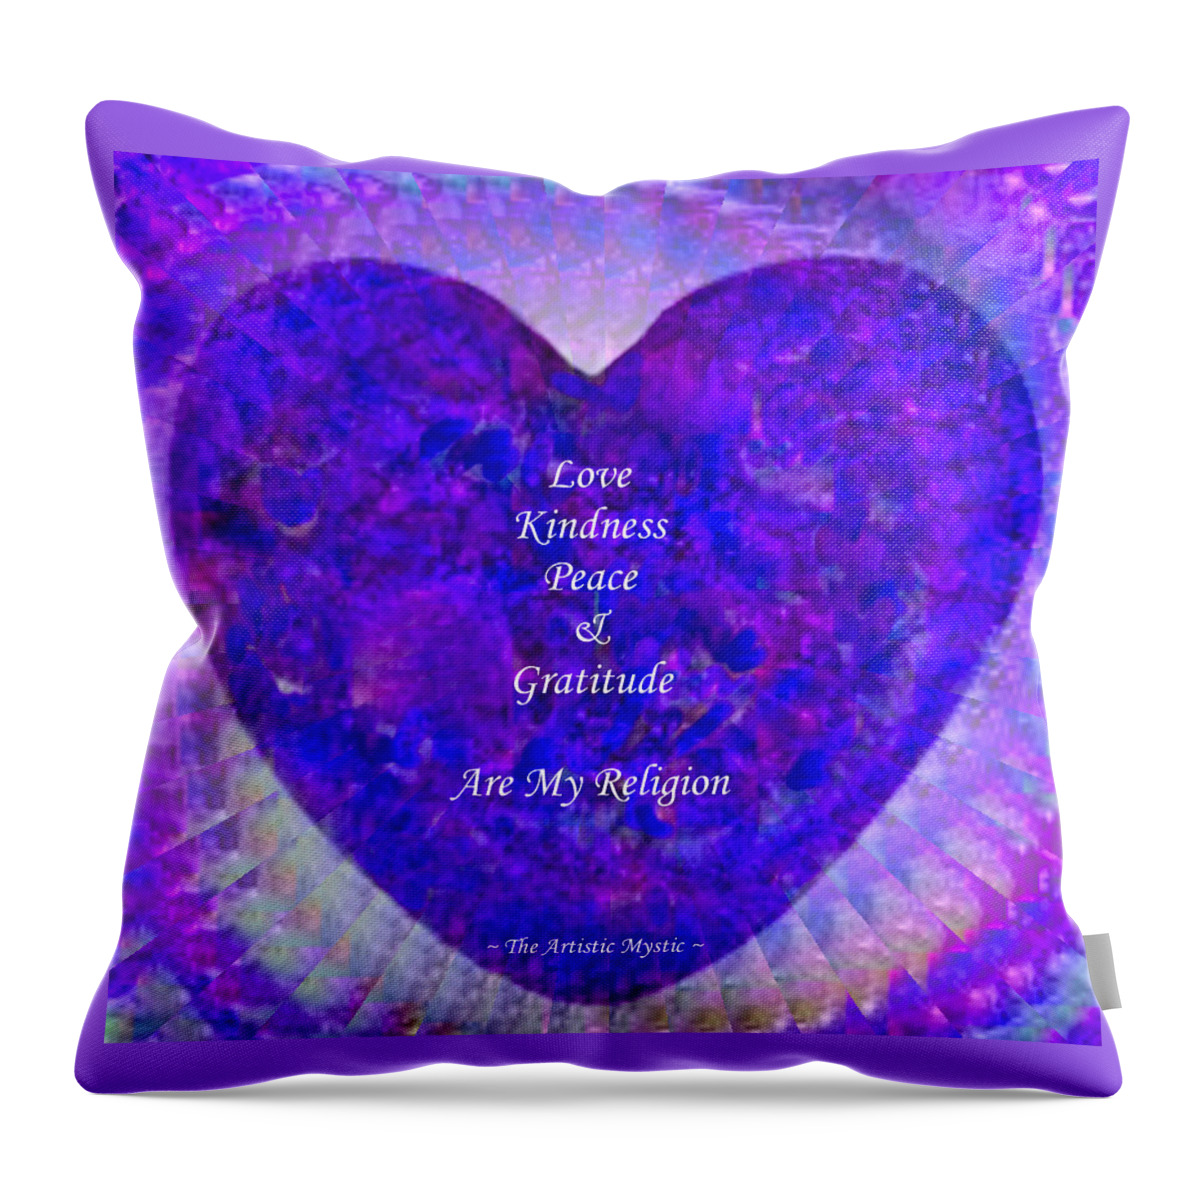 Heart Throw Pillow featuring the digital art My Religion - Purple by Artistic Mystic